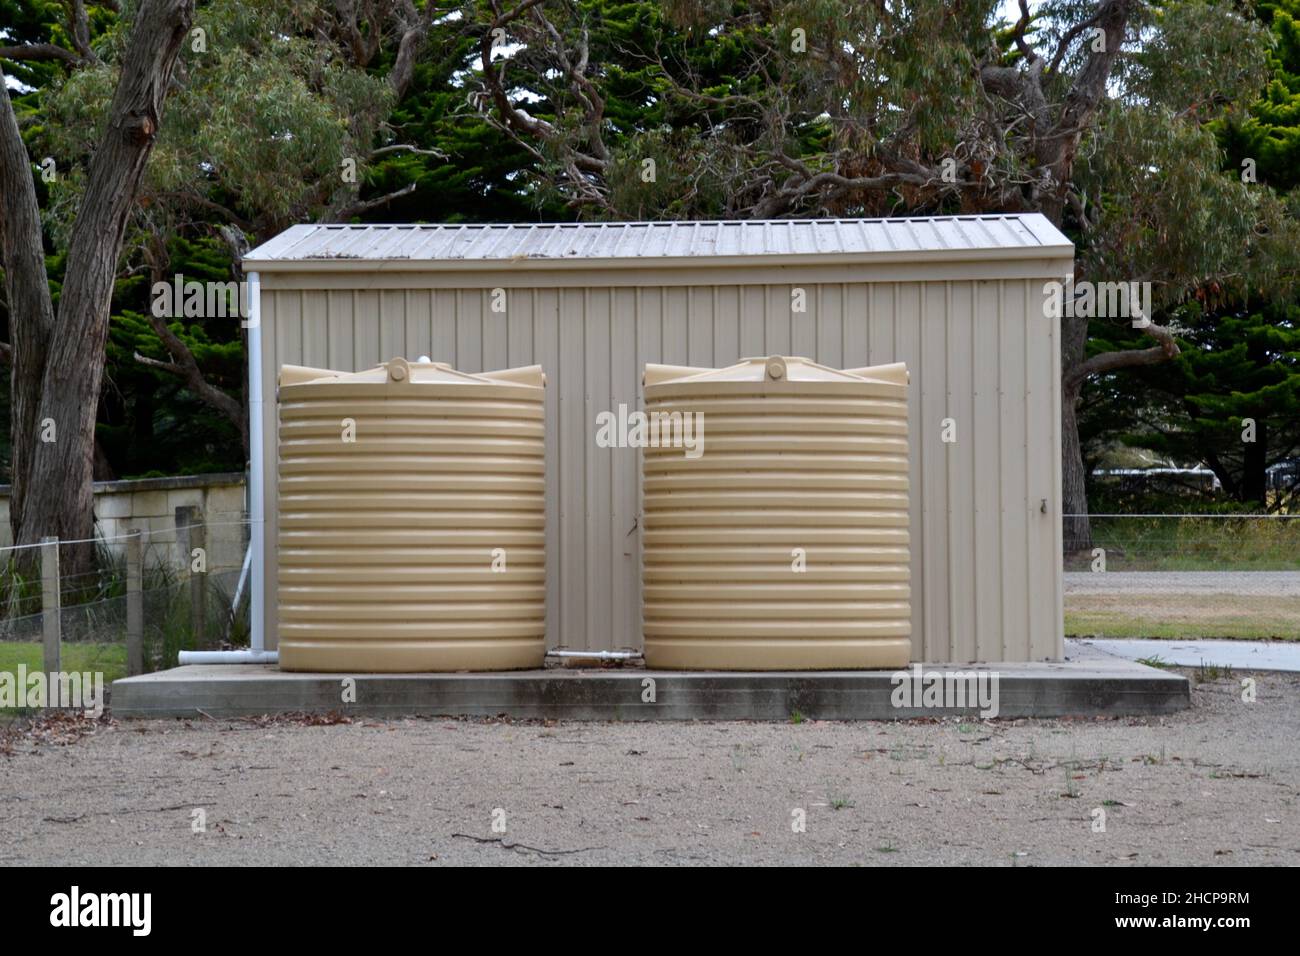 Two plastic water tanks outside a farm shed at a winery or vineyard in regional Australia Stock Photo